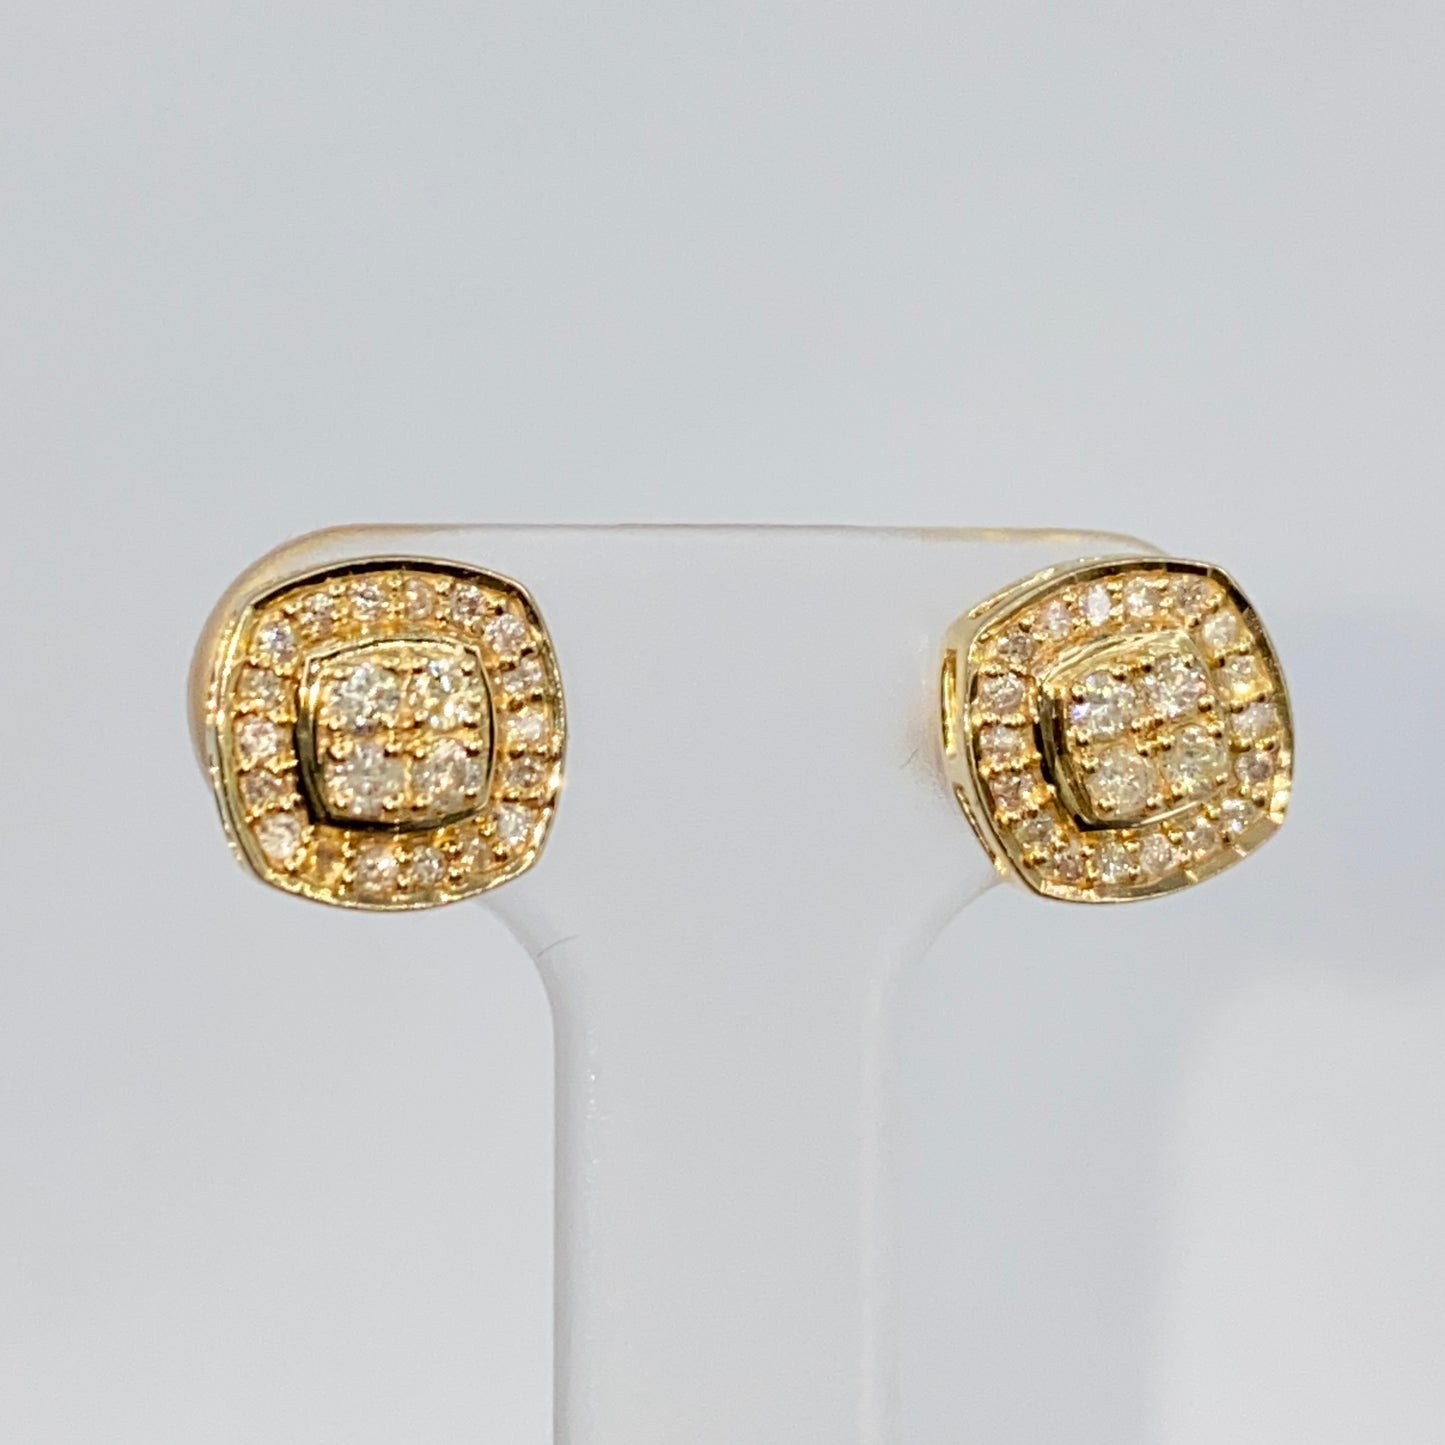 14K 8MM Rounded Square Halo Diamond Earrings